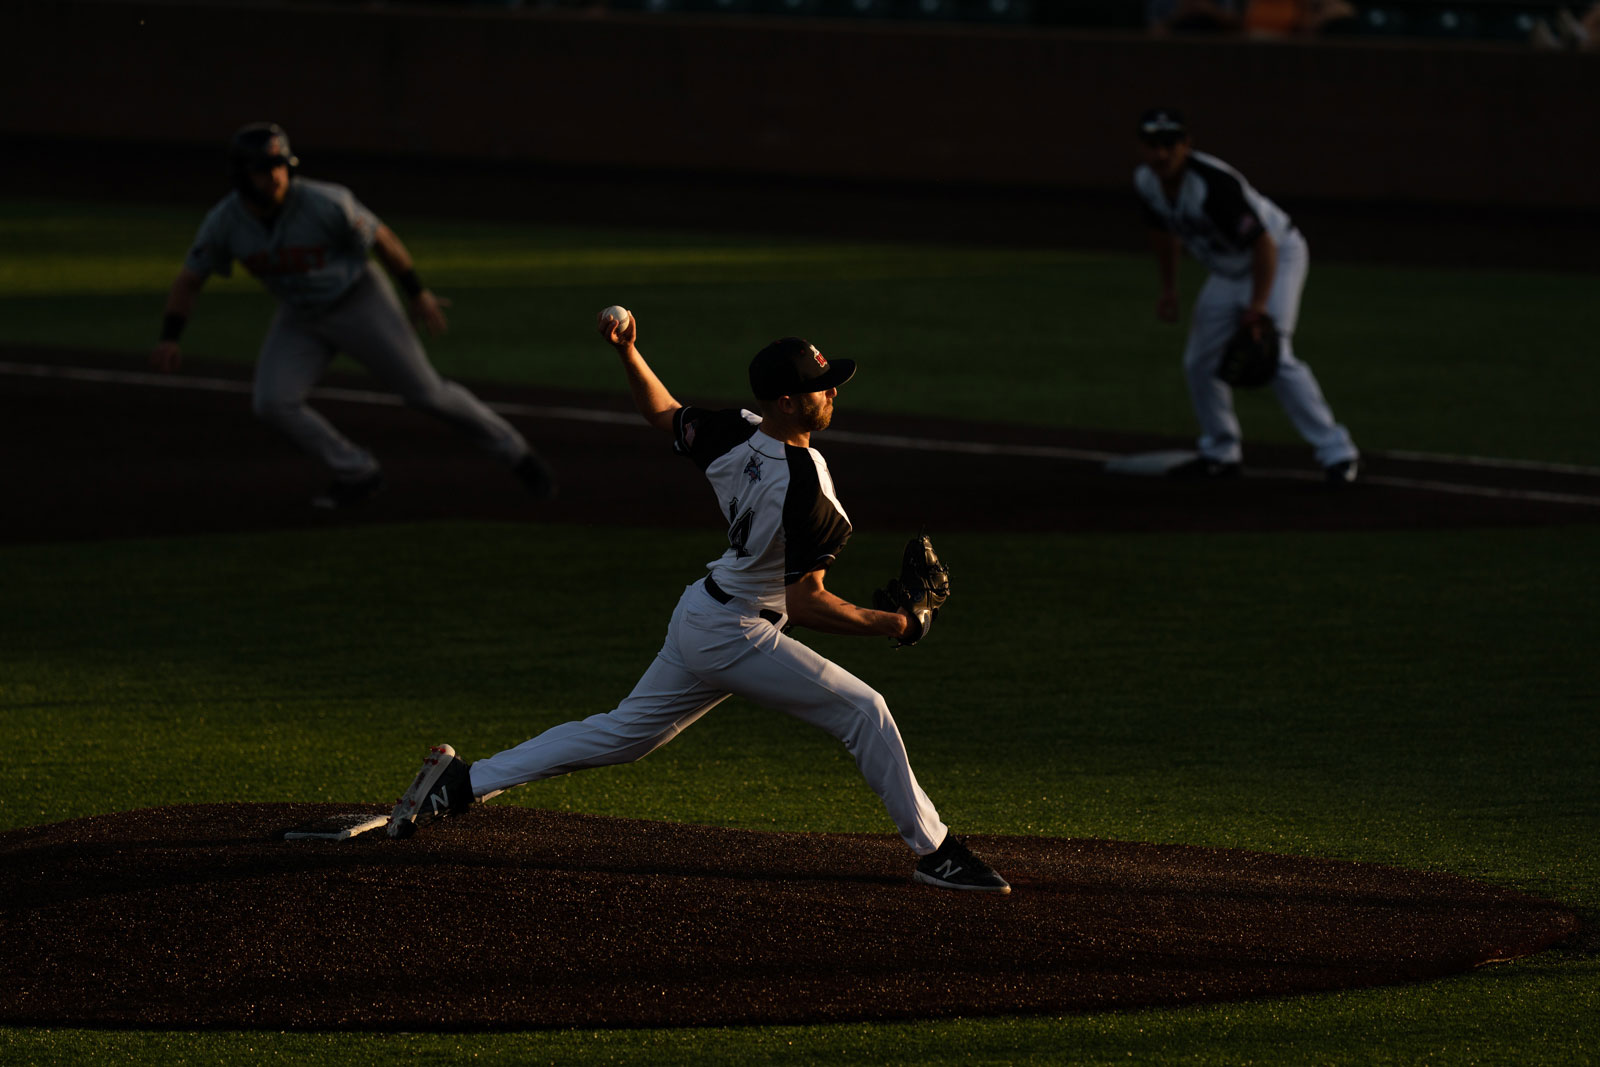 Alex Winkleman of the River City Rascals pitches during the Frontier League game against the Joliet Slammers at CarShield Field in O'Fallon, Missouri